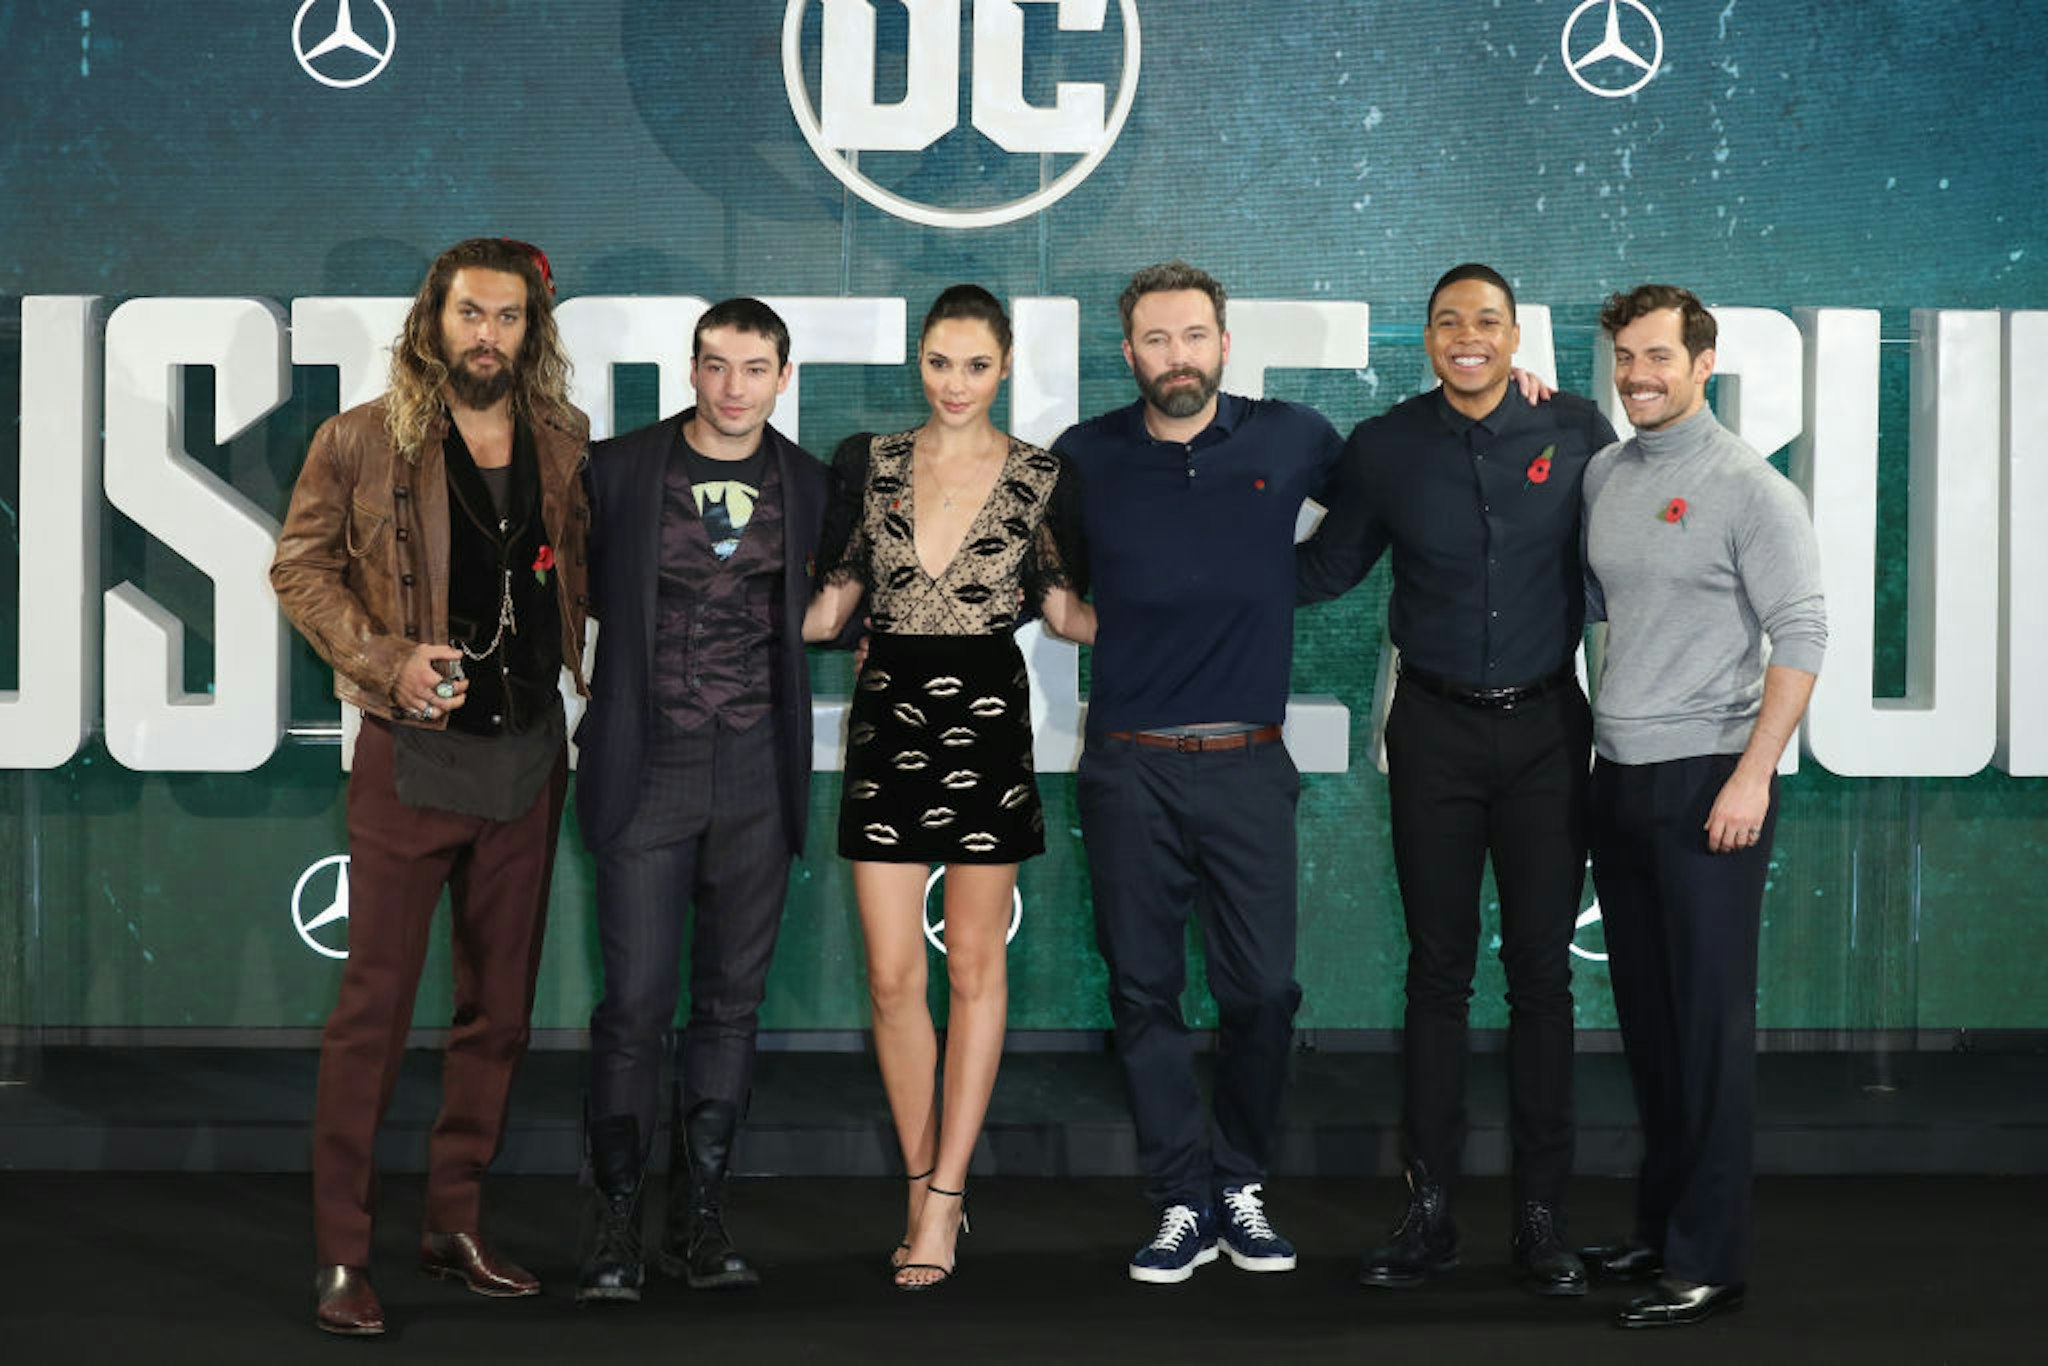 LONDON, ENGLAND - NOVEMBER 04: Actors Jason Momoa, Ezra Miller, Gal Gadot, Ben Affleck, Ray Fisher and Henry Cavill attend the 'Justice League' photocall at The College on November 4, 2017 in London, England. (Photo by Tim P. Whitby/Getty Images)